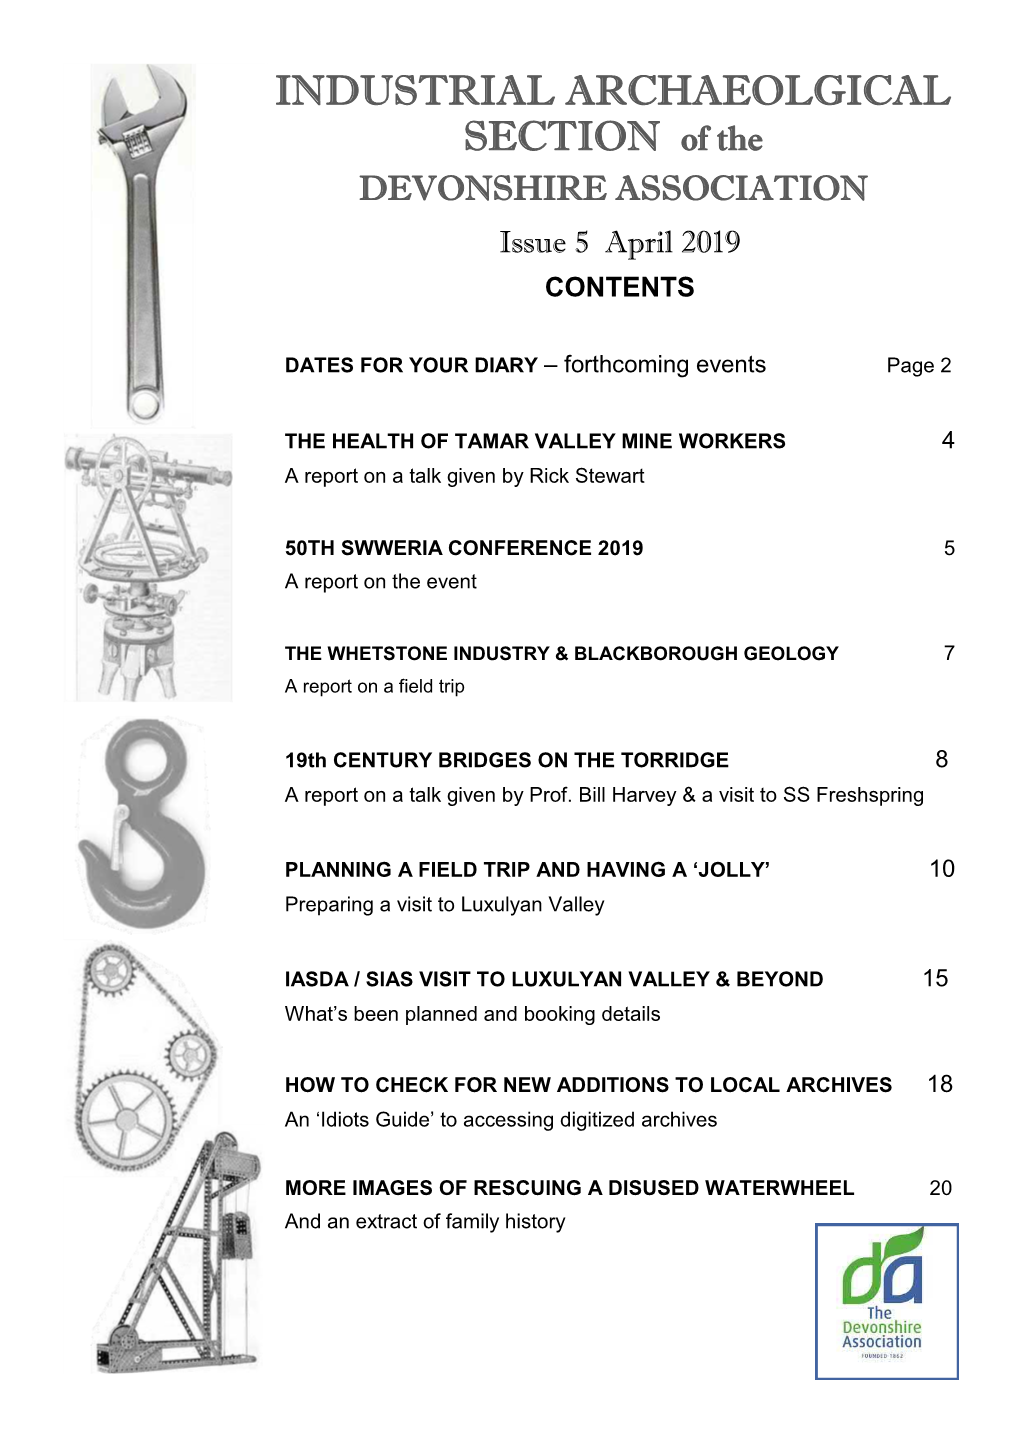 INDUSTRIAL ARCHAEOLGICAL SECTION of the DEVONSHIRE ASSOCIATION Issue 5 April 2019 CONTENTS